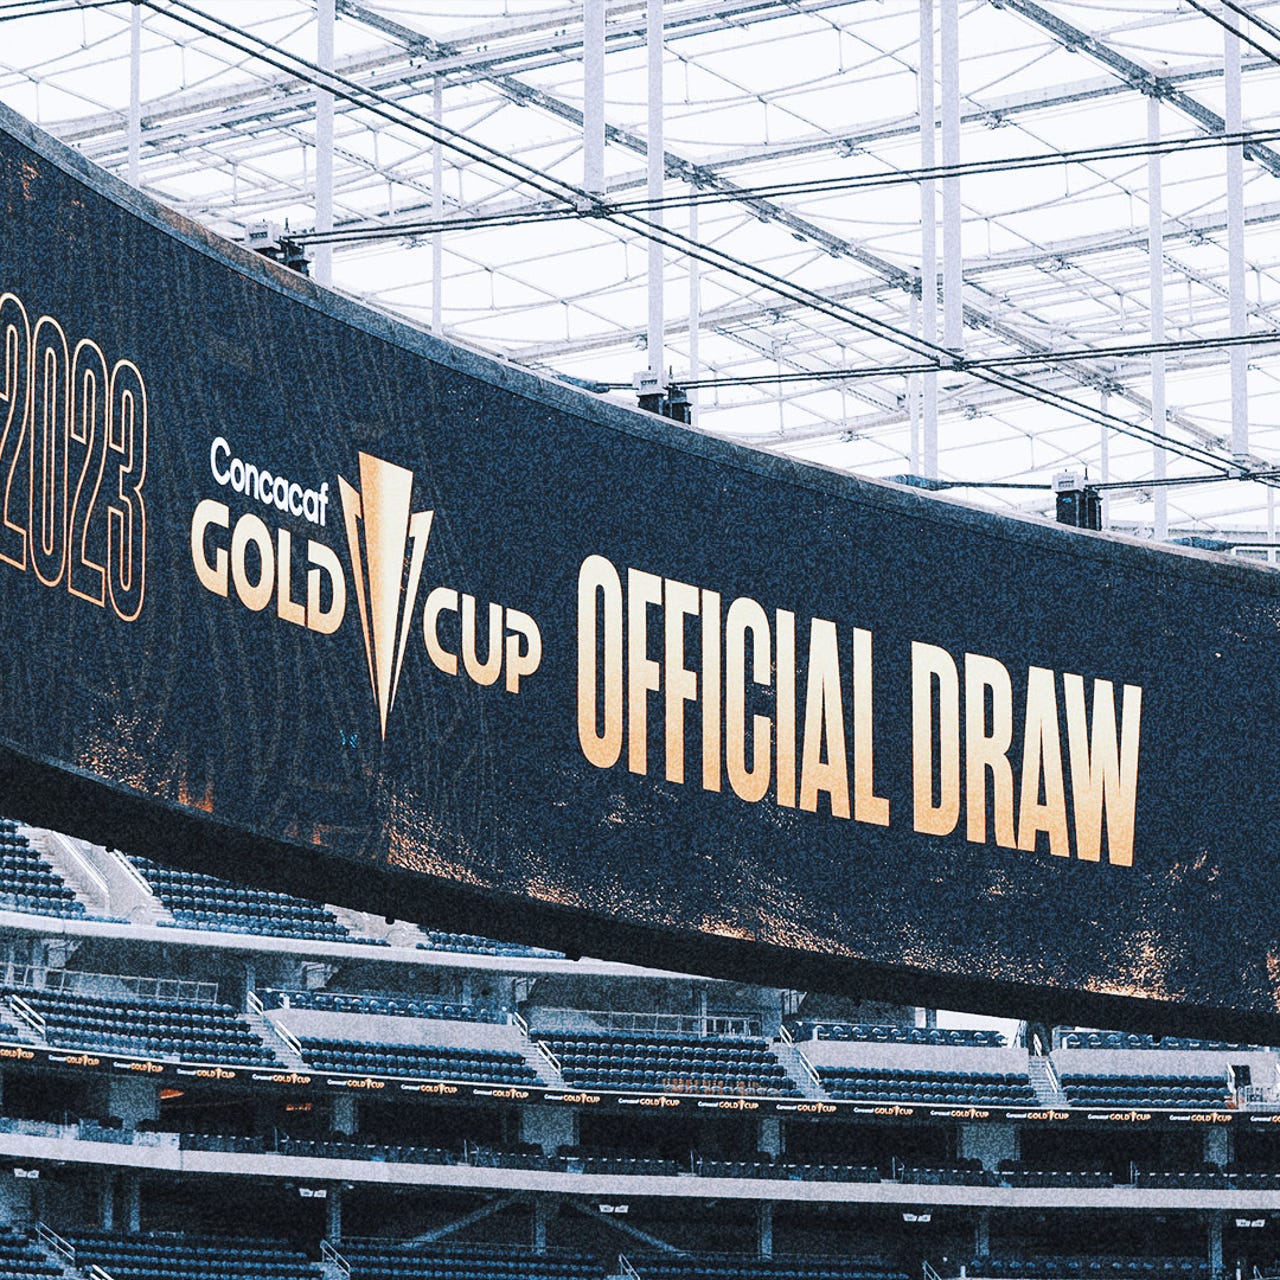 Gold Cup 2023 draw results: Canada to face Cuba, Guatemala and Team TBD